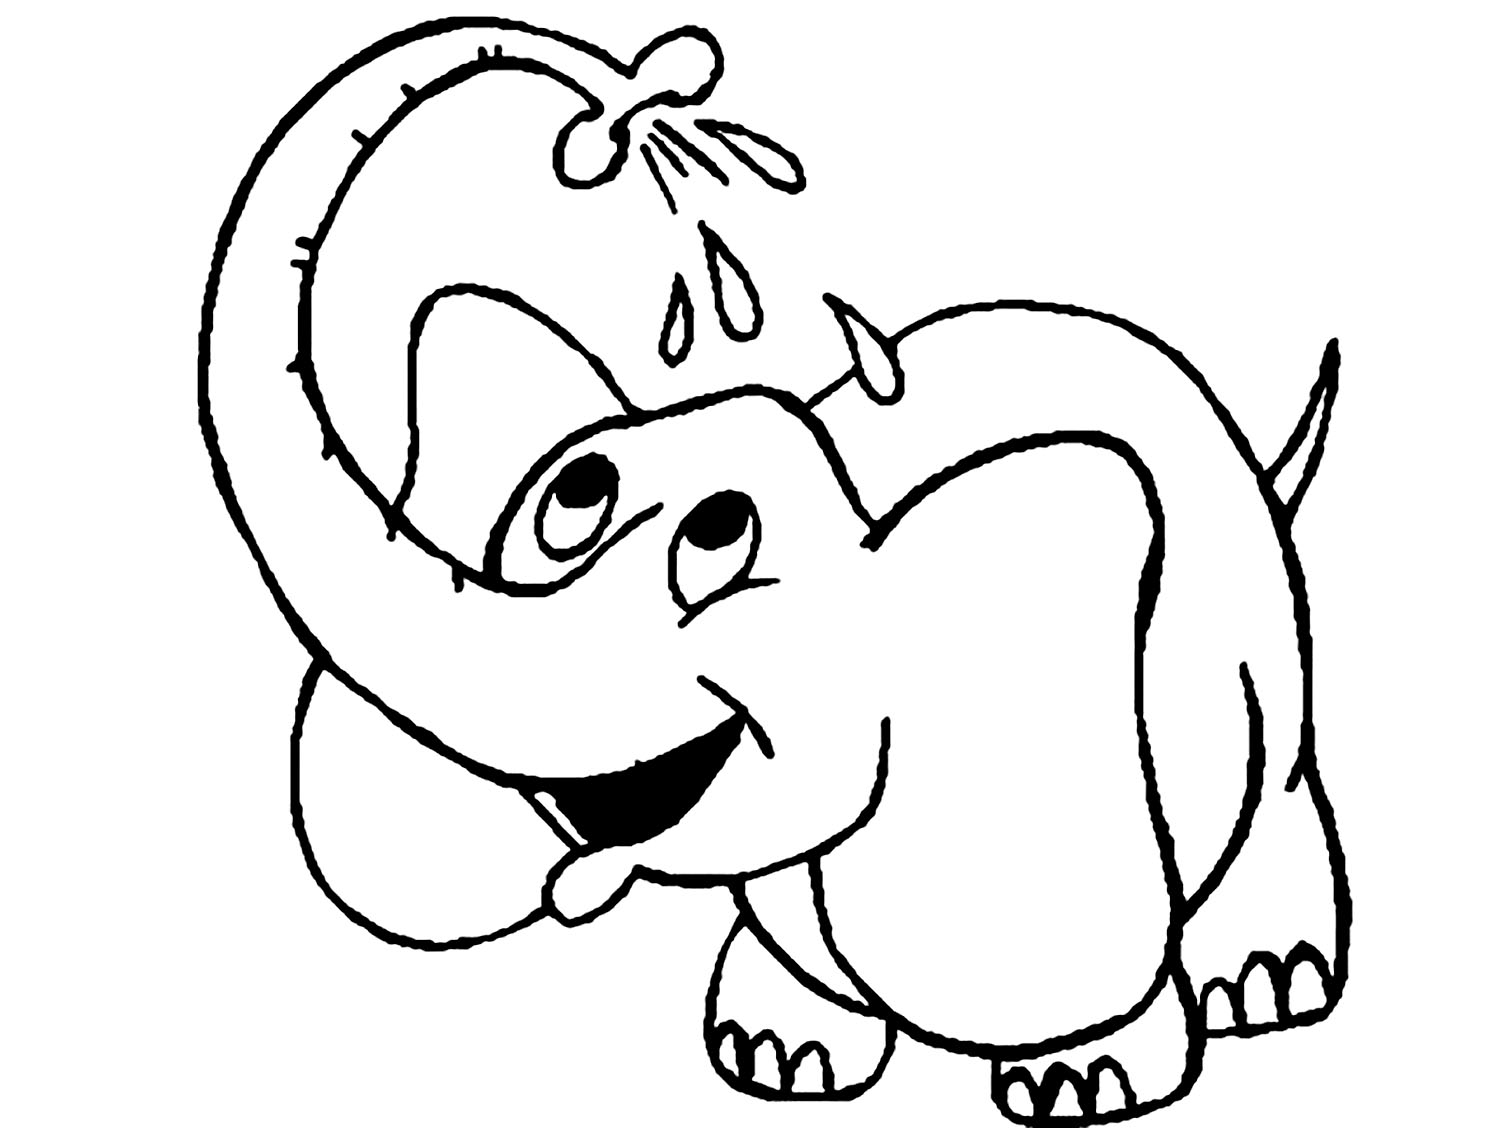 Download Elephants to download for free - Elephants Kids Coloring Pages